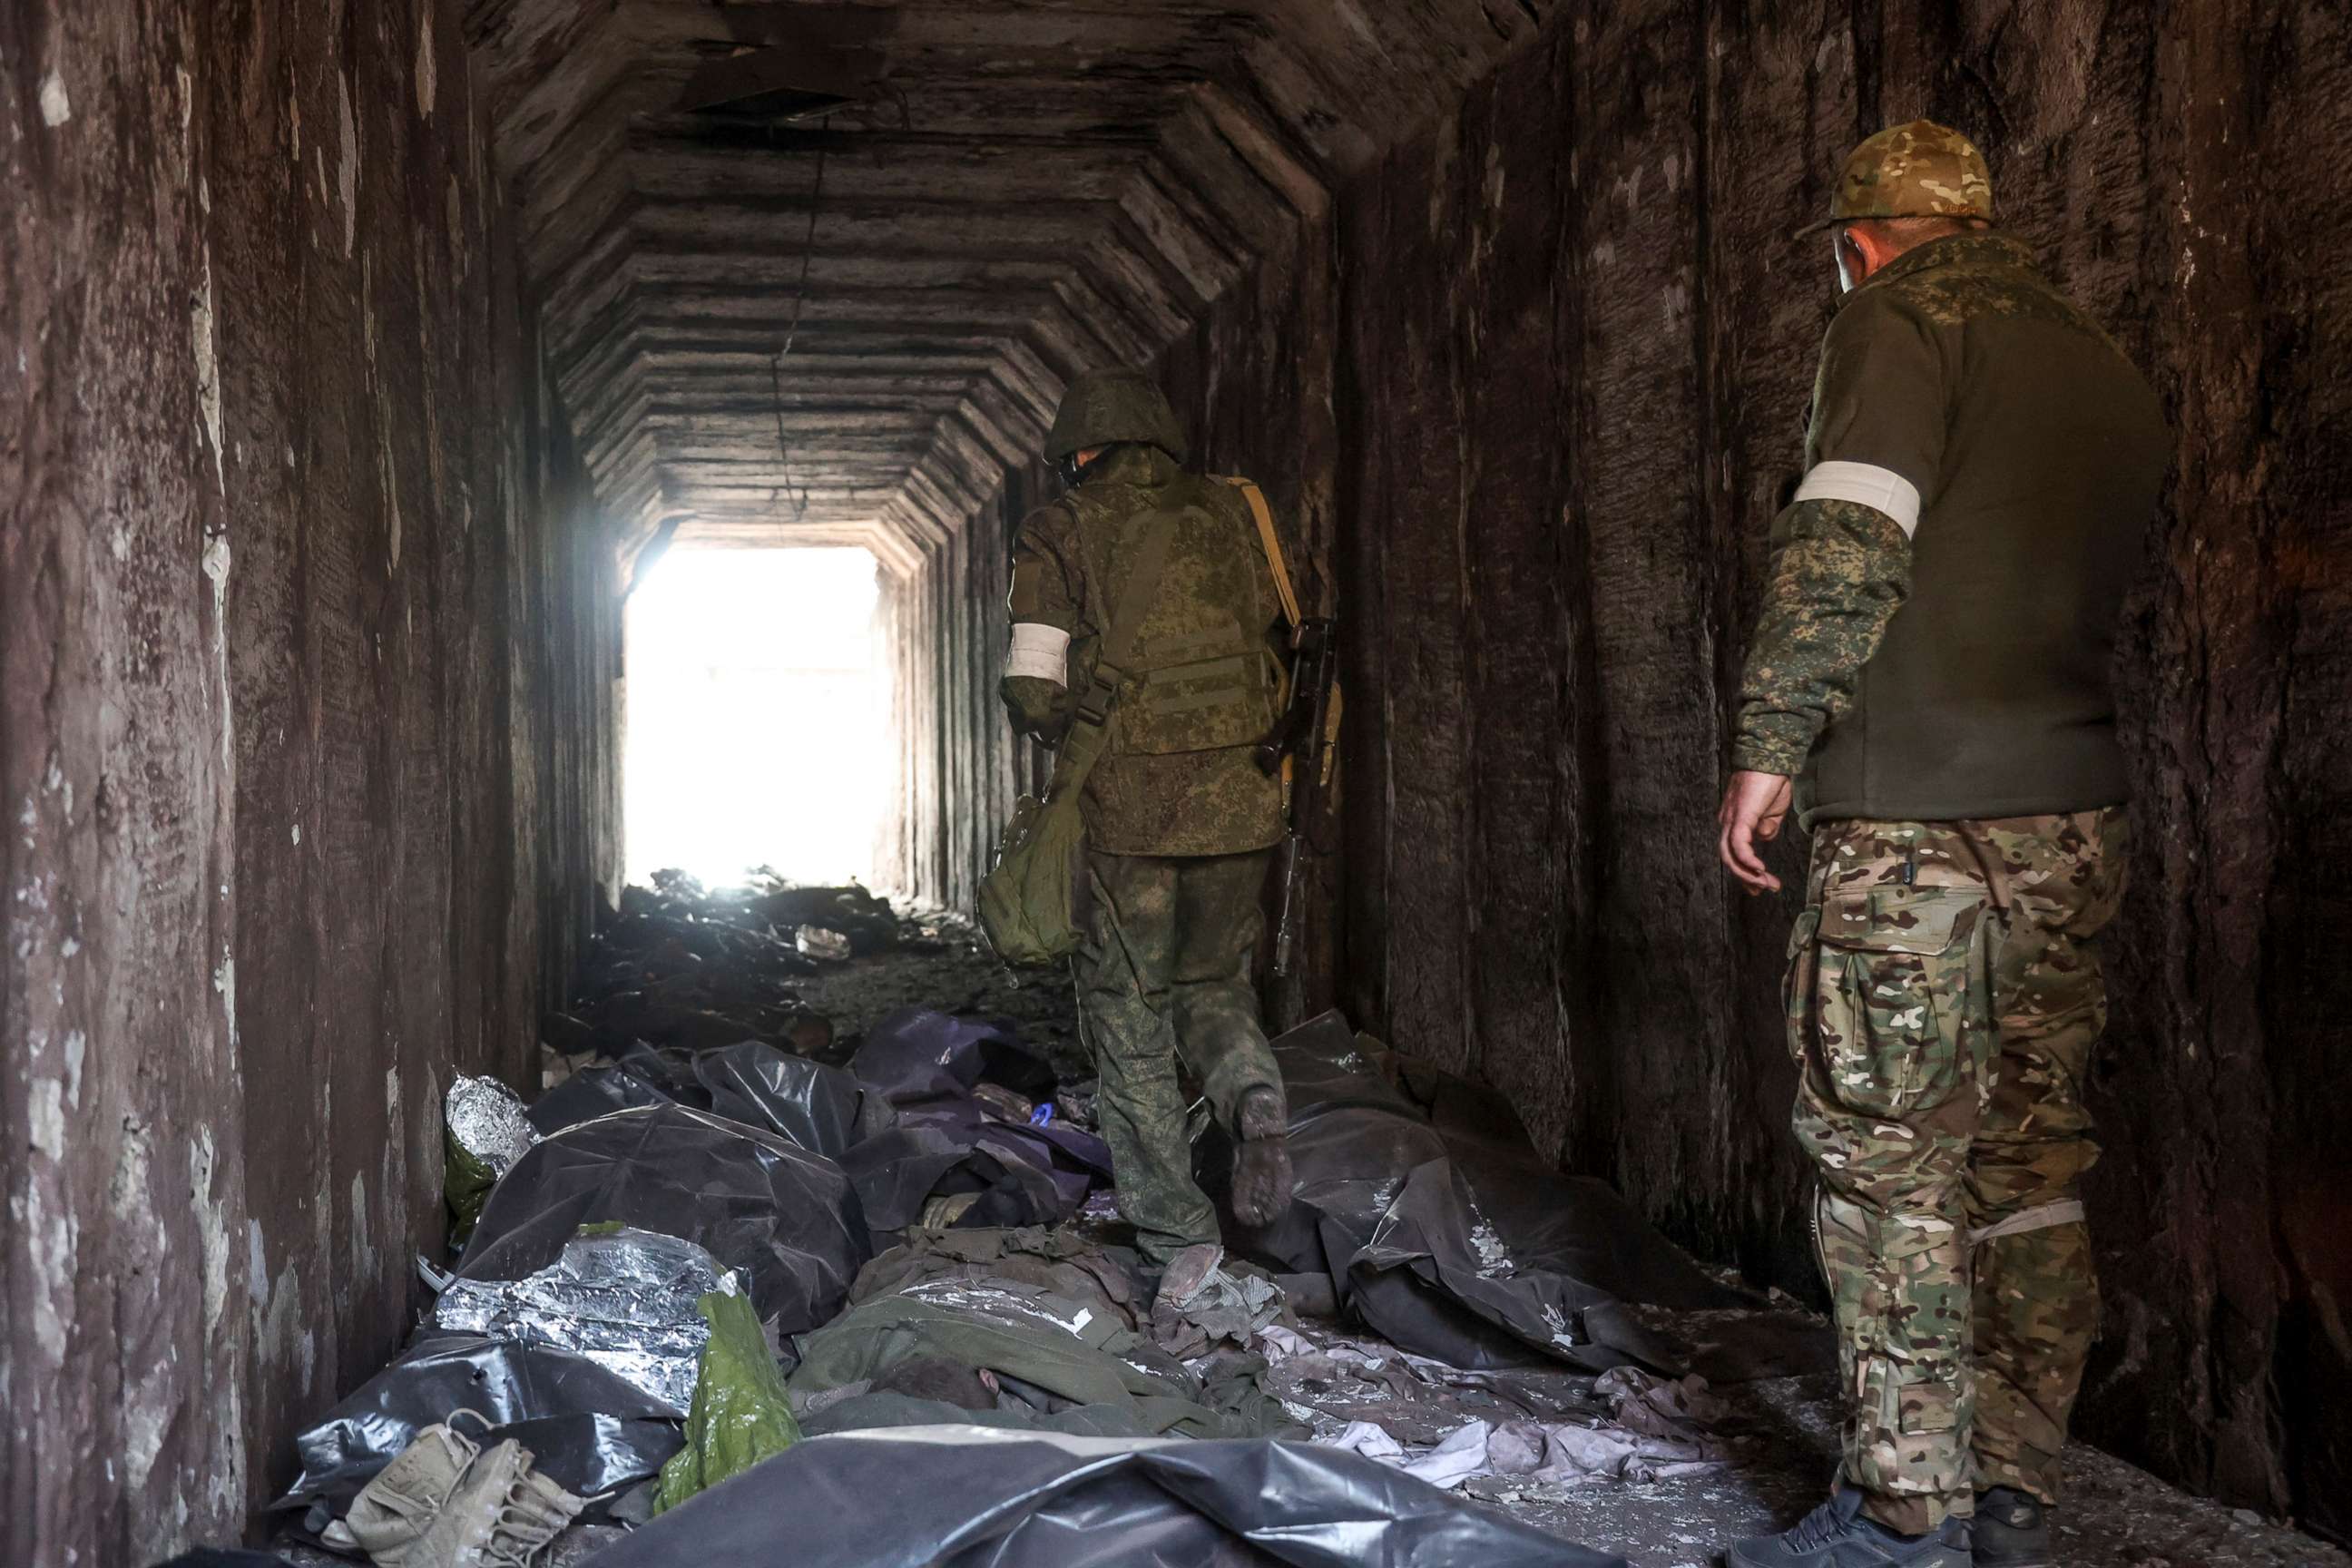 PHOTO: Servicemen of the Donetsk People's Republic militia look at bodies of Ukrainian soldiers placed in plastic bags in a tunnel in an area controlled by Russian-backed separatist forces in Mariupol, Ukraine, April 18, 2022.